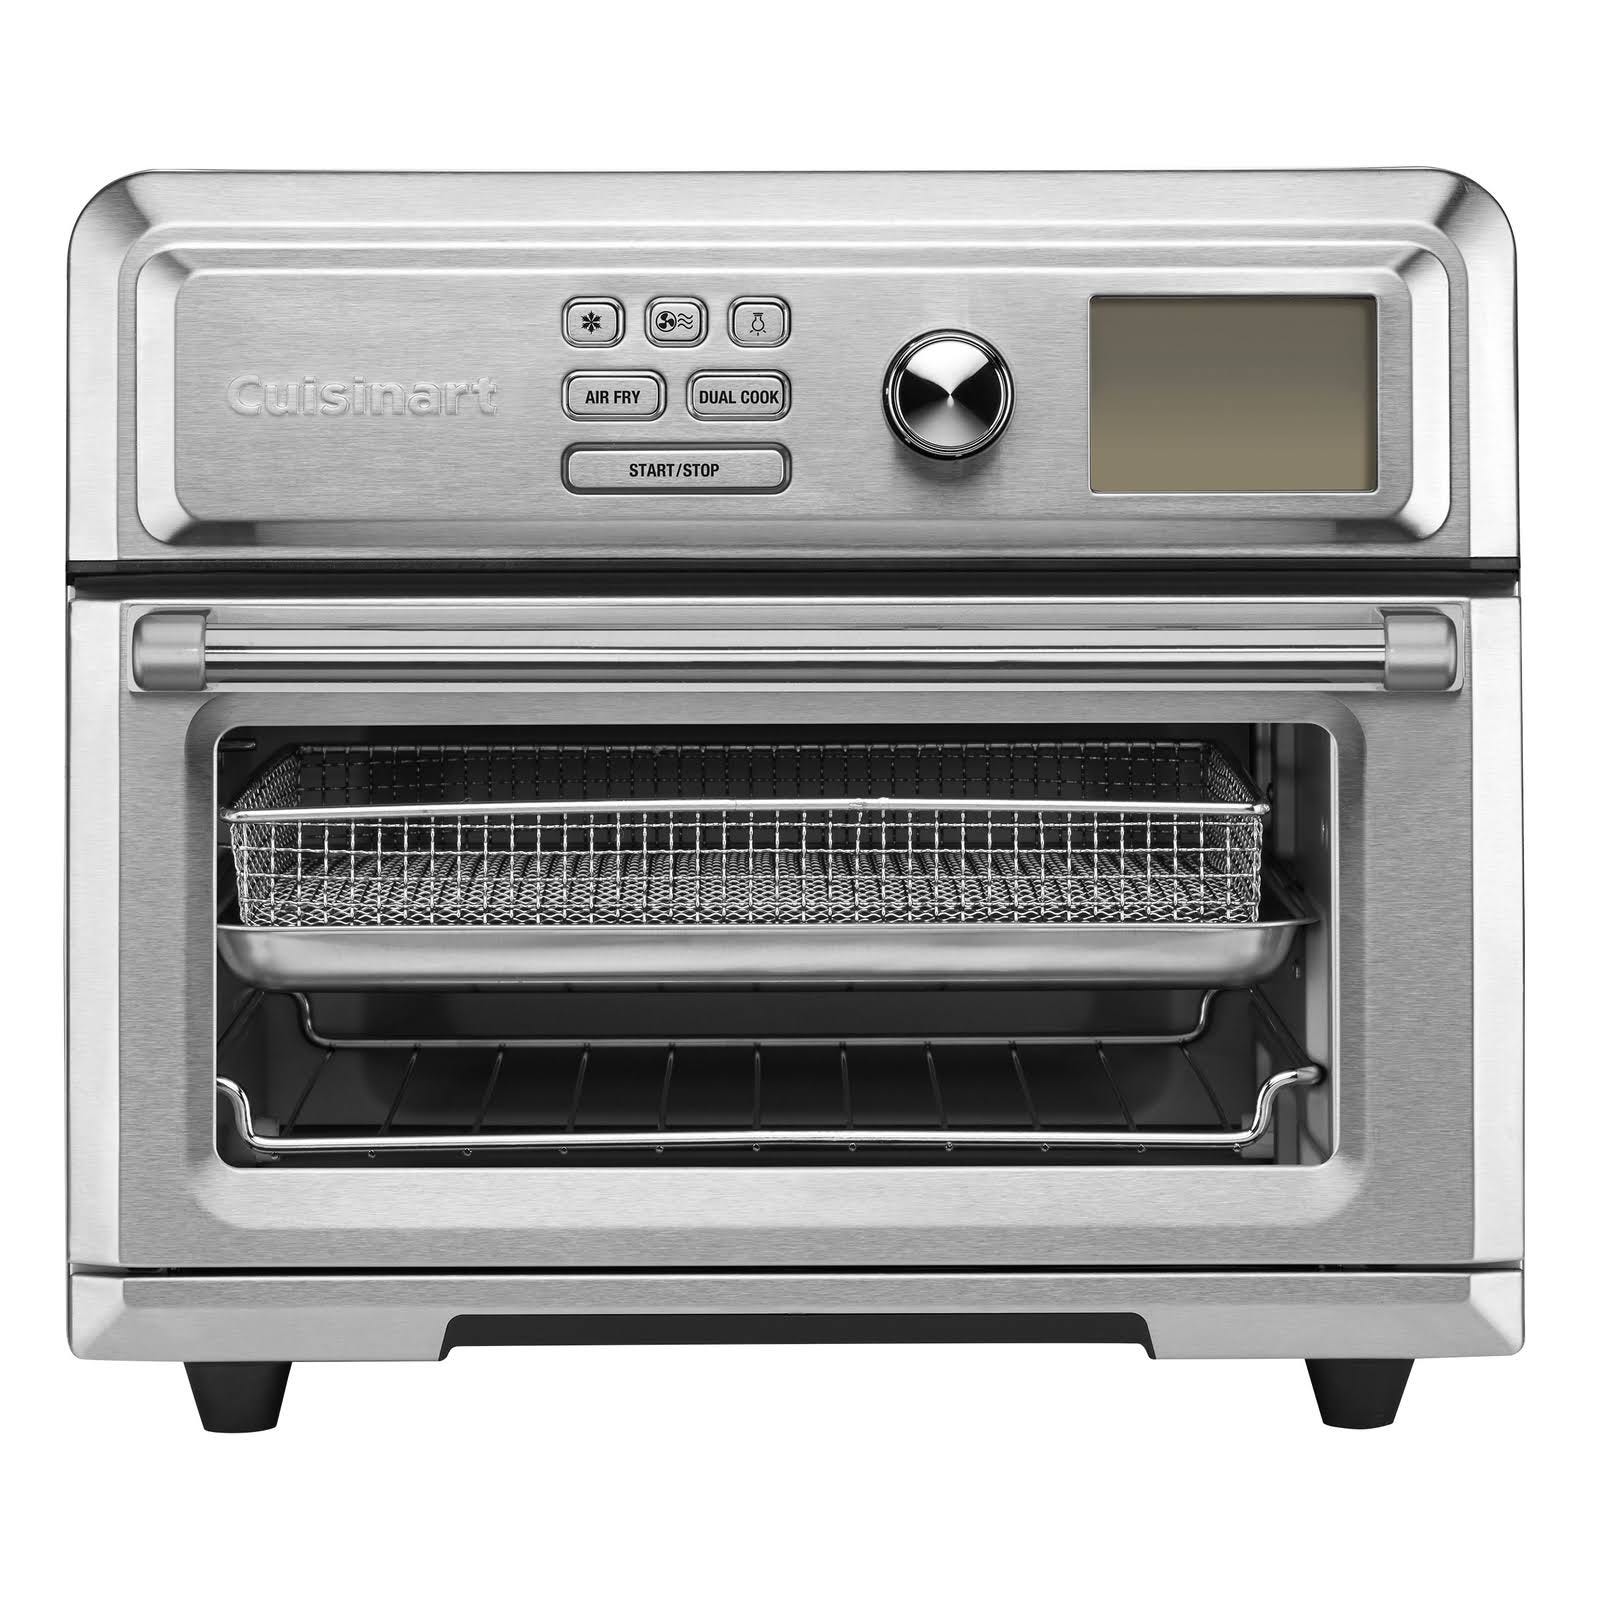 Cuisinart Digital Air Fryer Oven - Multifunctional Toaster, Bake, Broil, and More | Image